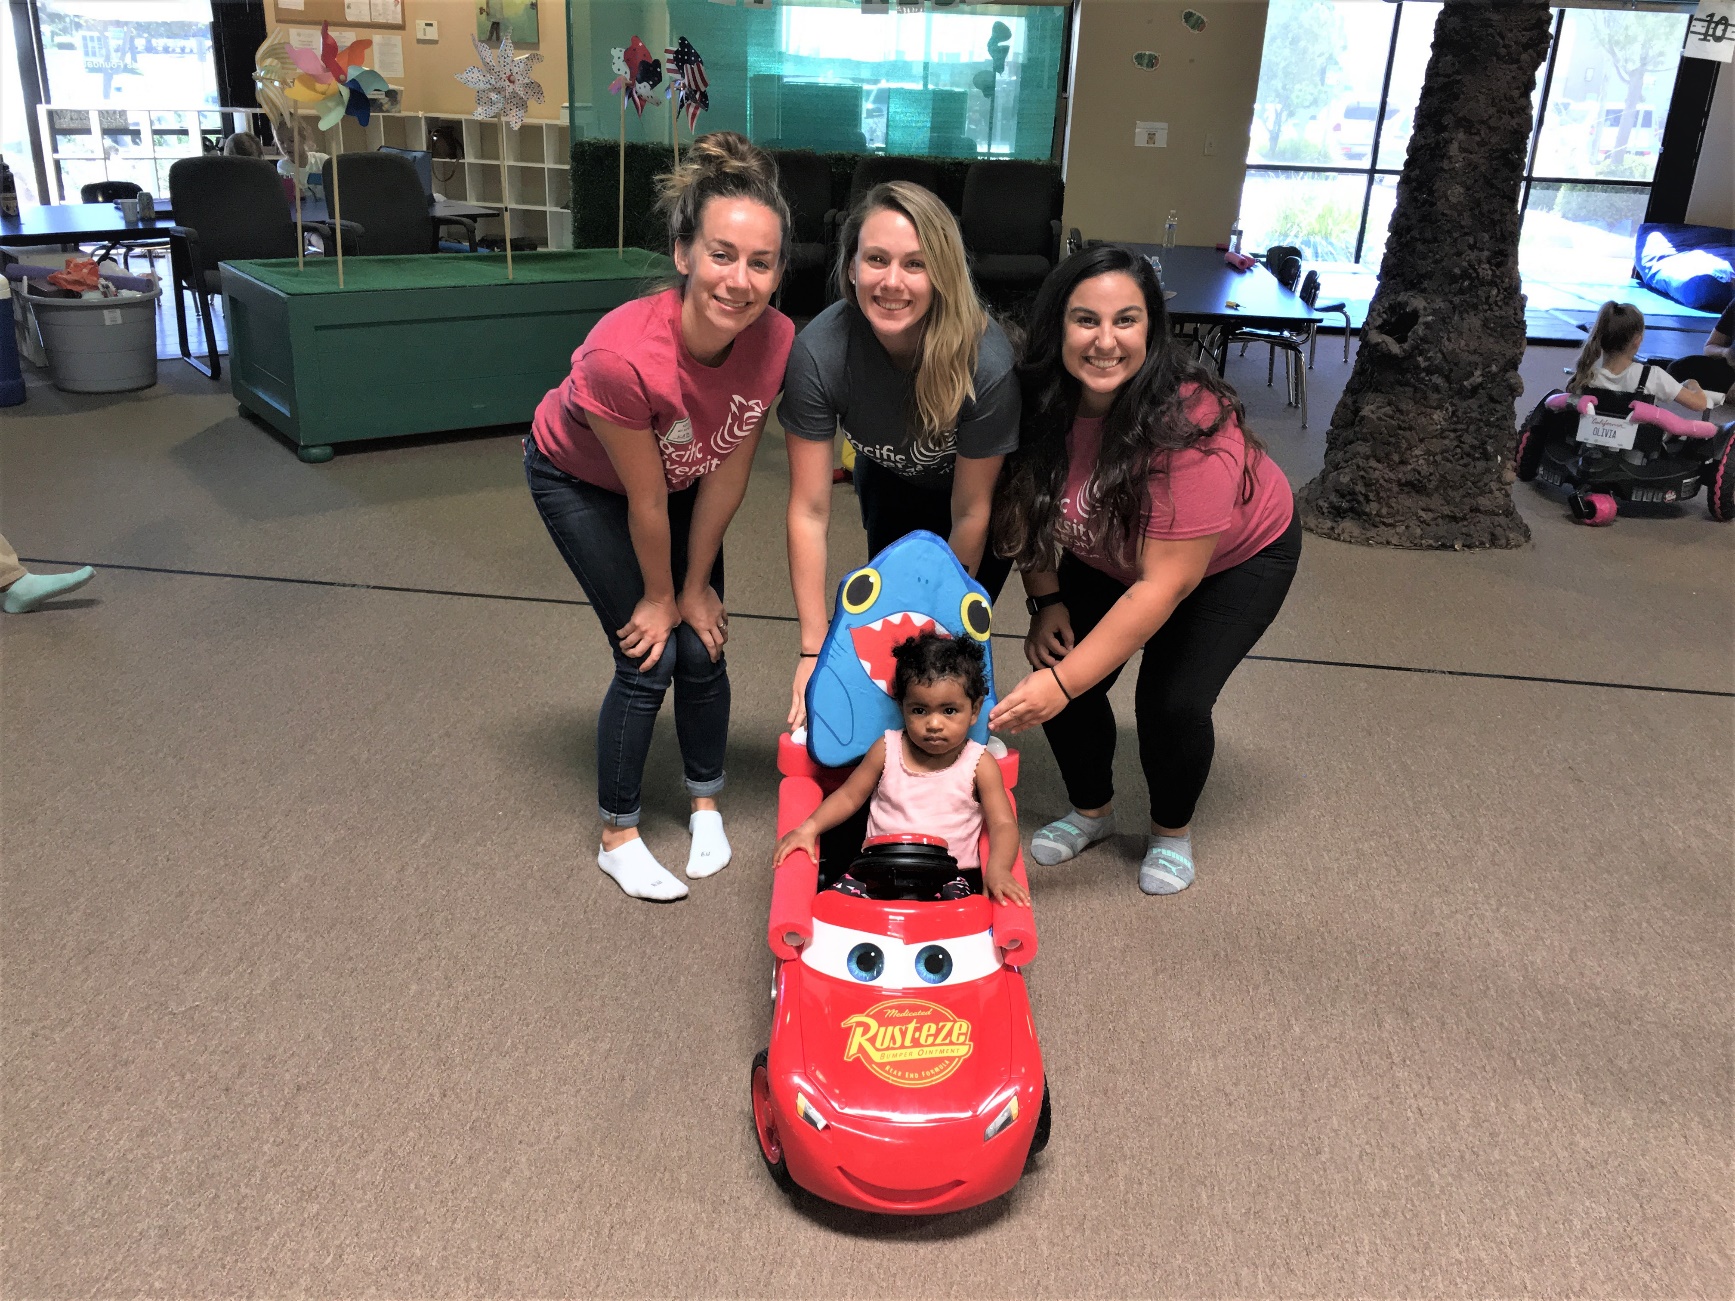 Pictured left to right is Kaitlin Silva (‘2019), Kristen Santos (‘2019), and Paige Rhodes (‘2019) at Littlefield Therapy in Murrieta , California